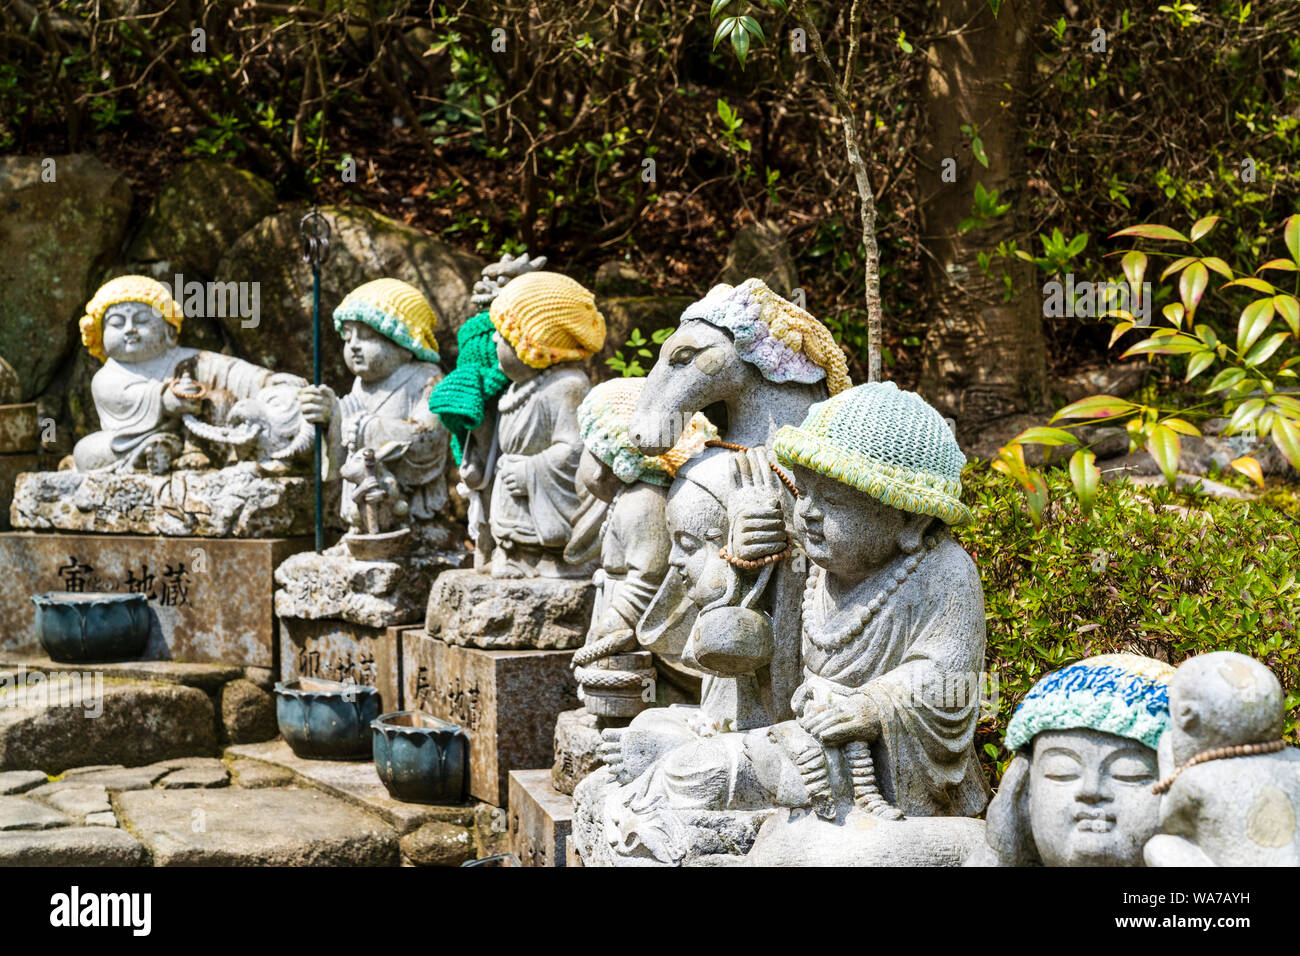 Japan, Miyajima. Daisho-in temple. Row of small stone Jizo statues of Buddhist monks, all different. All have knitted woolen hats on Stock Photo